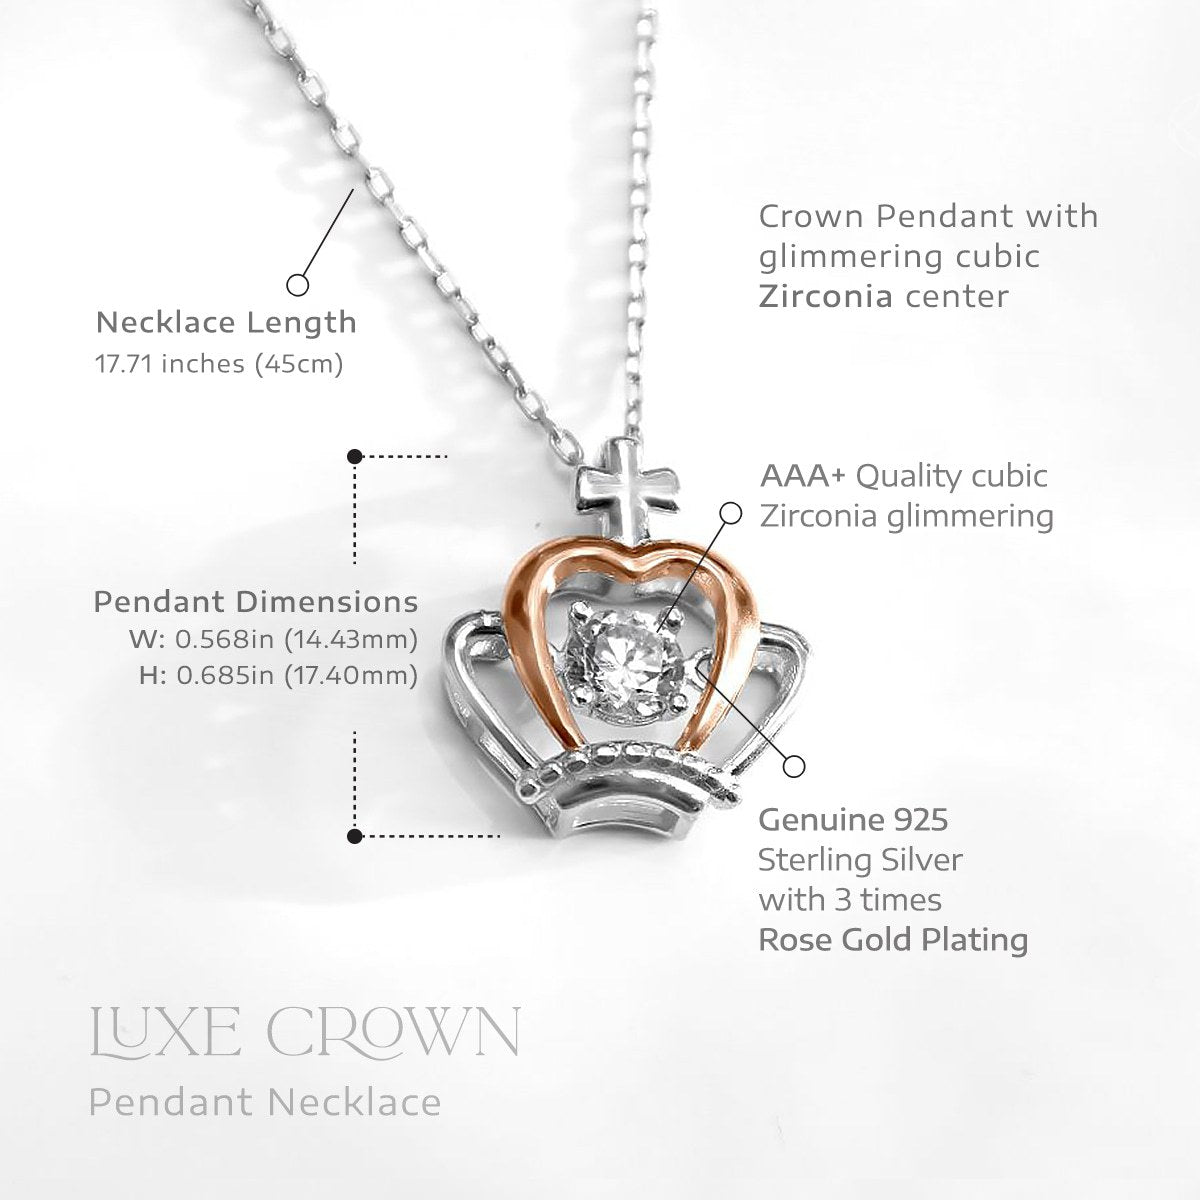 Granddaughter, Here Together - Luxe Crown Necklace Gift Set